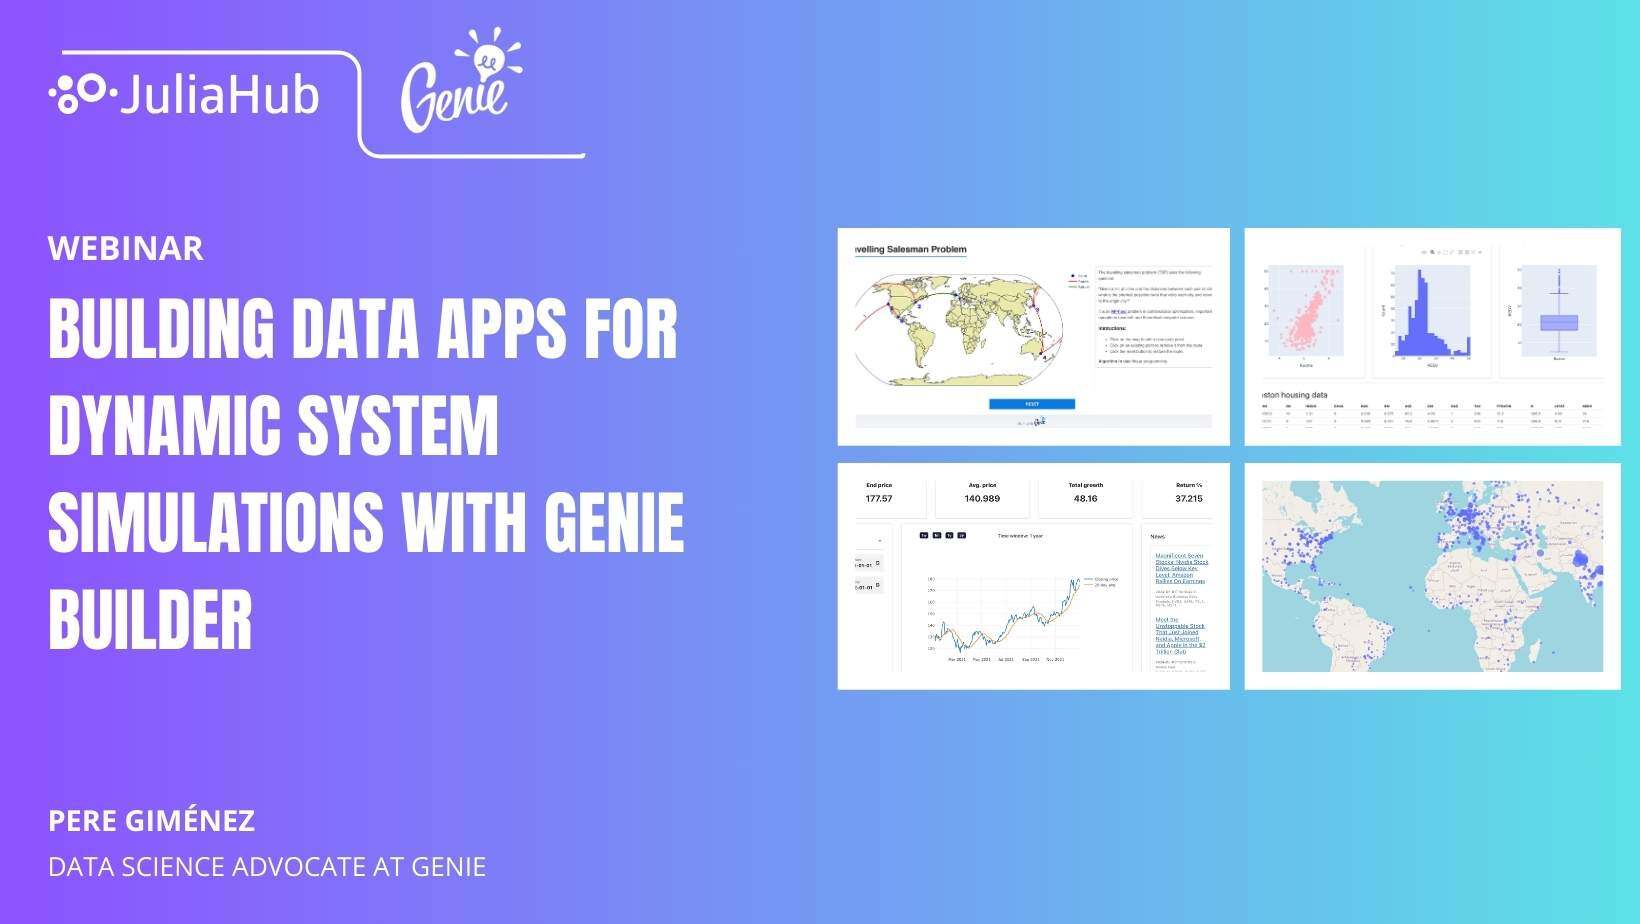 Learn how to build data apps for dynamic system simulations with Genie Builder